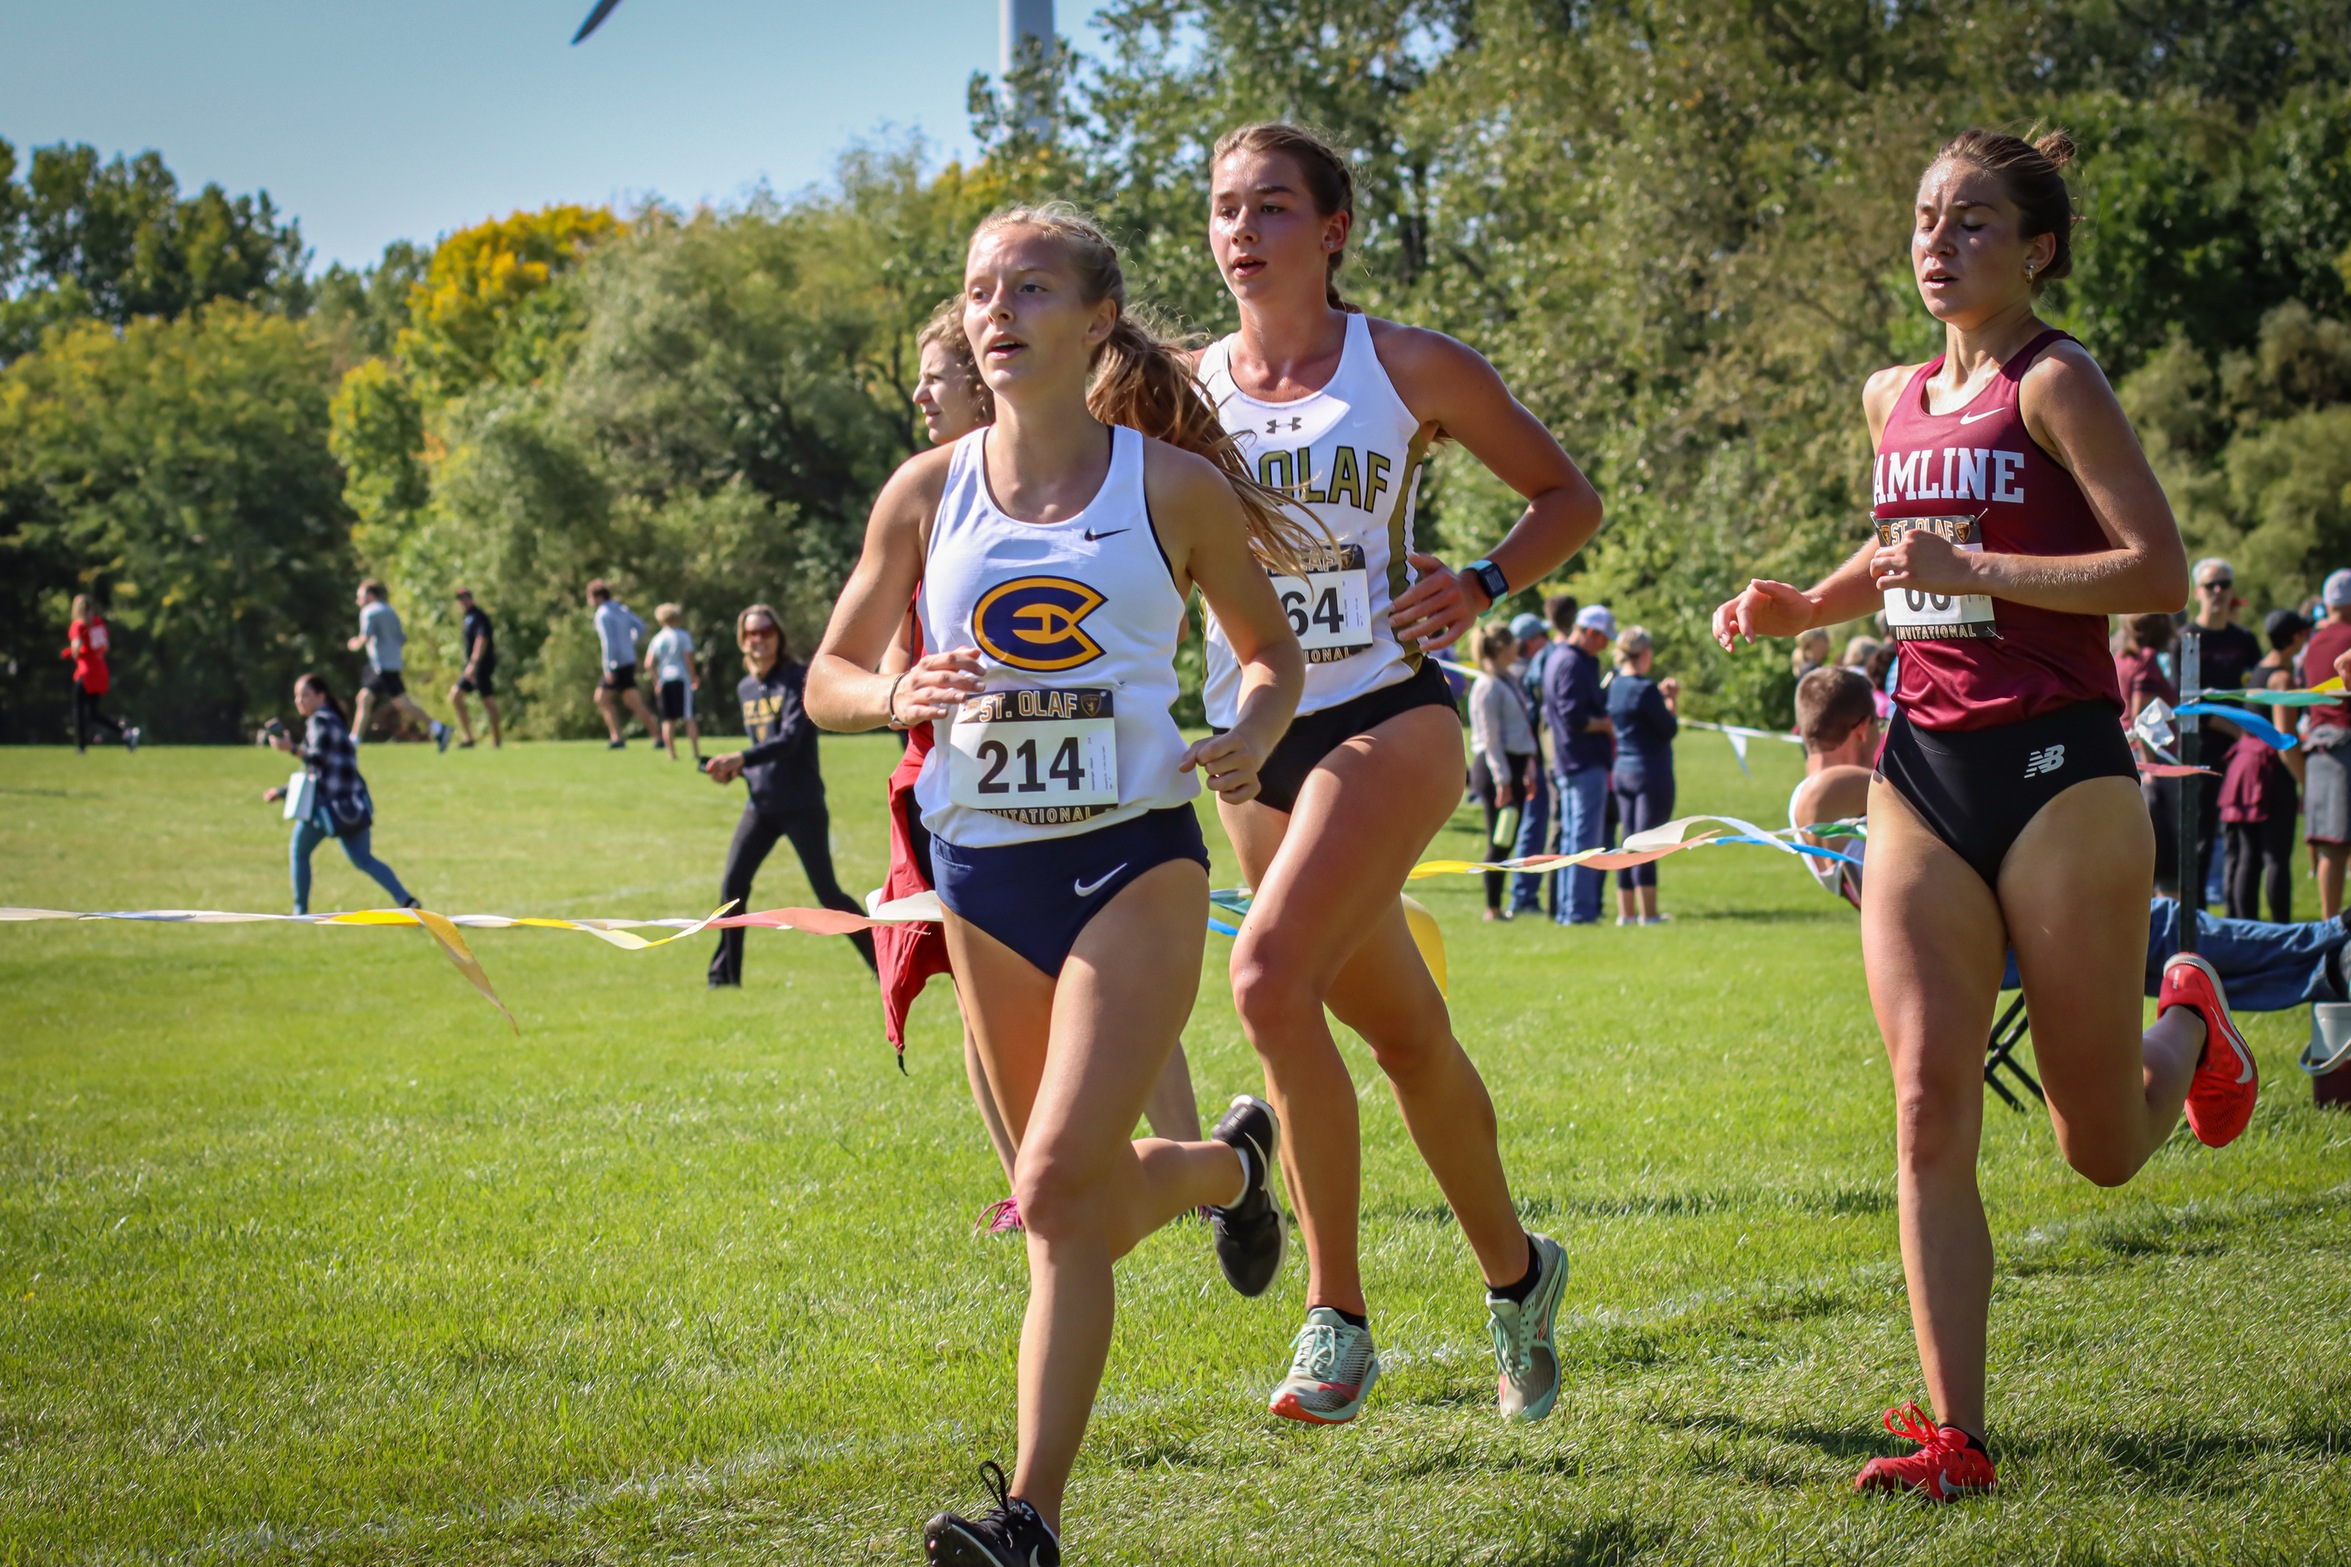 Women’s Cross Country wins the Blugold Invitaitional, Men’s Cross Country finishes 5th